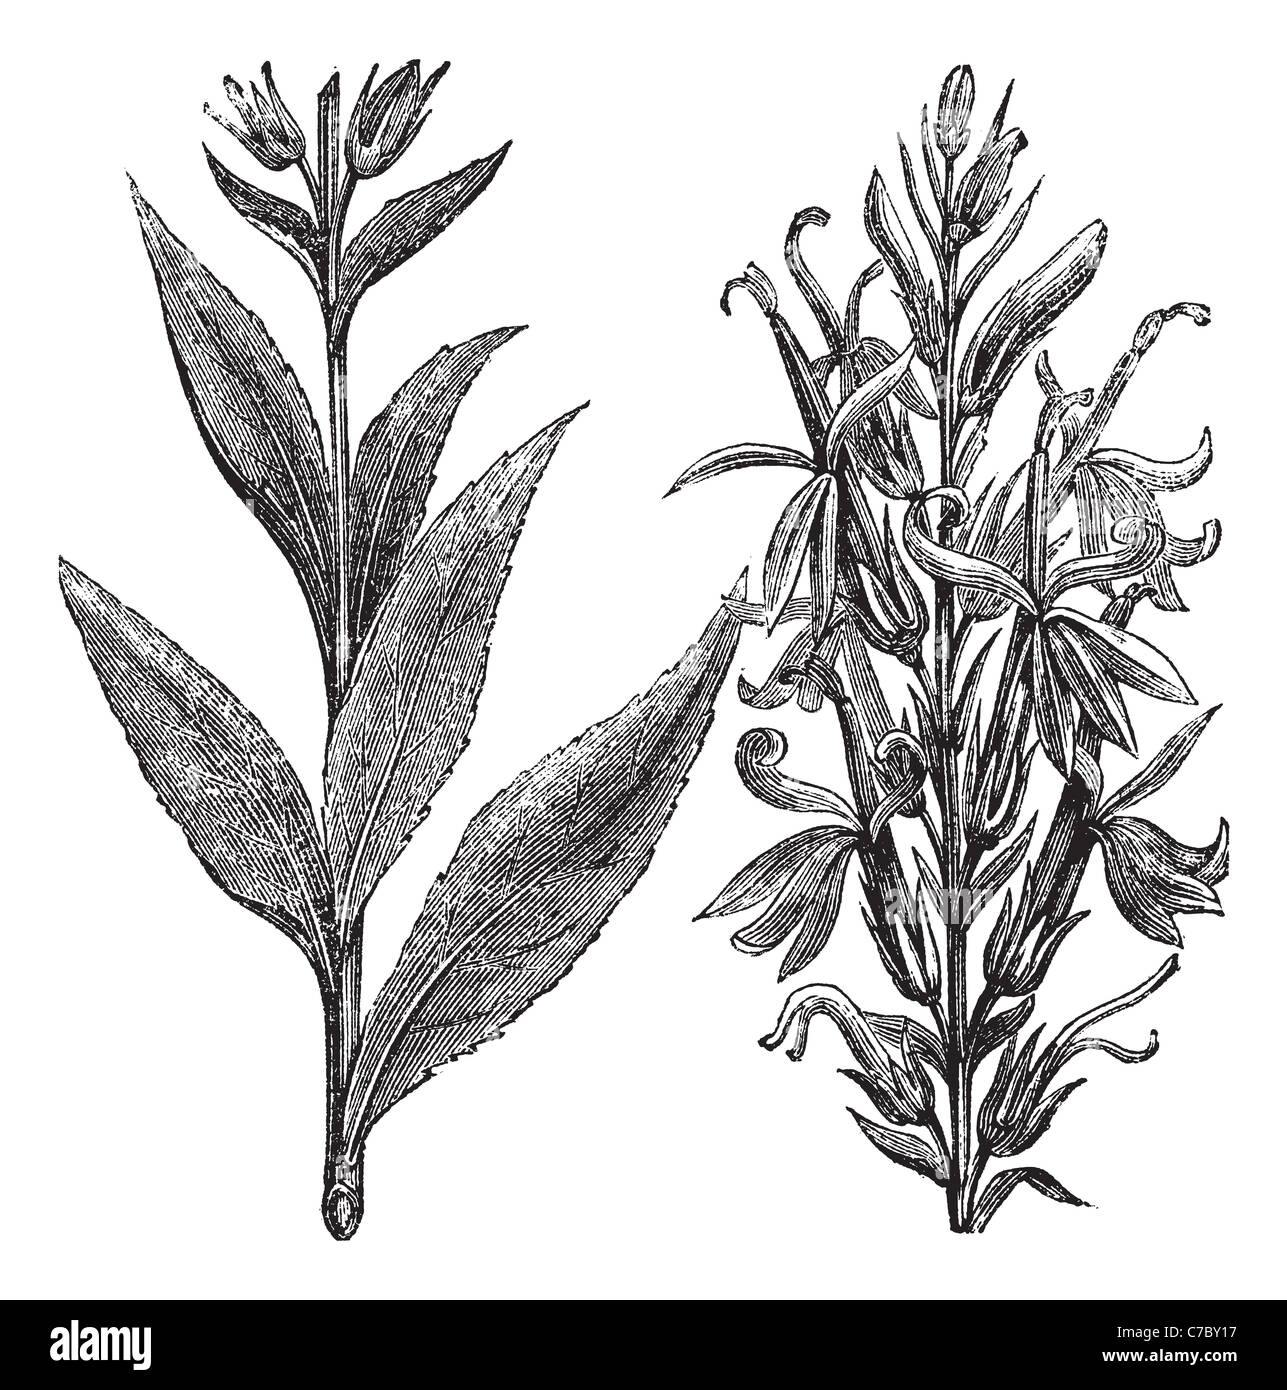 Cardinal Flower or Lobelia Fulgens, vintage engraving. Old engraved illustration of Cardinal Flower isolated on a white. Stock Photo